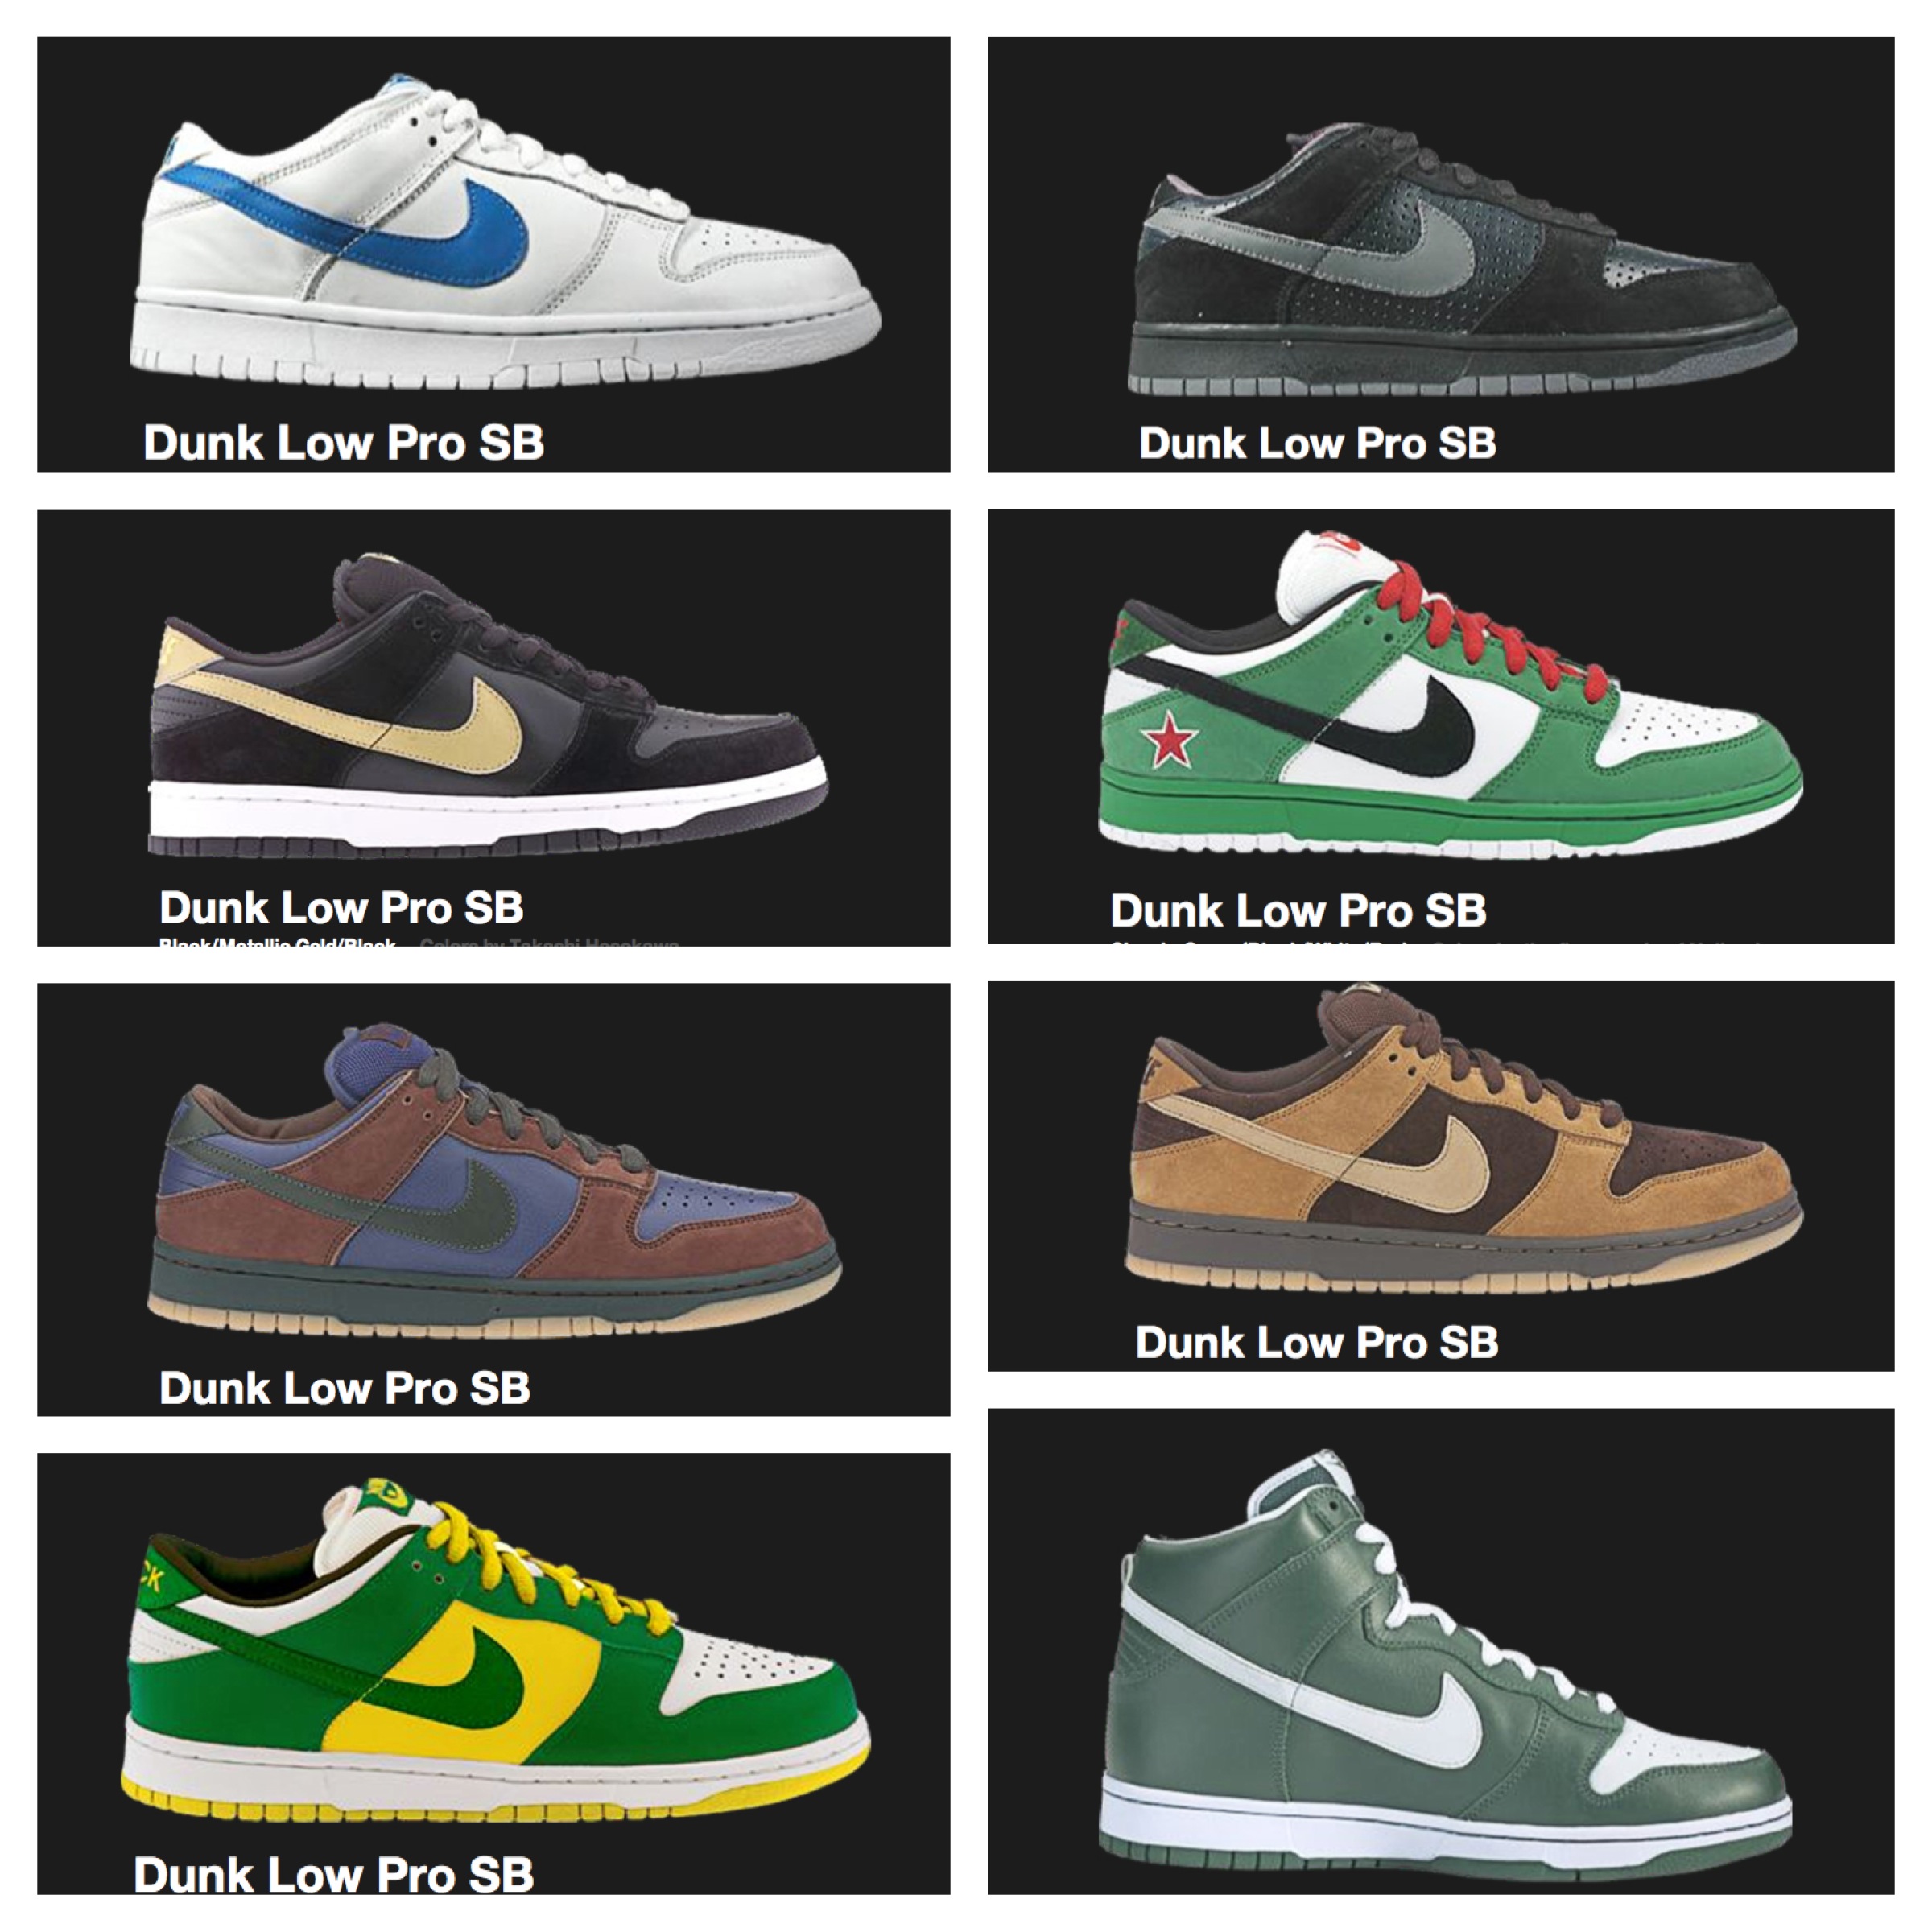 Reminiscing On Old Times With My Nike Dunk SB Collection | Dad's Picks